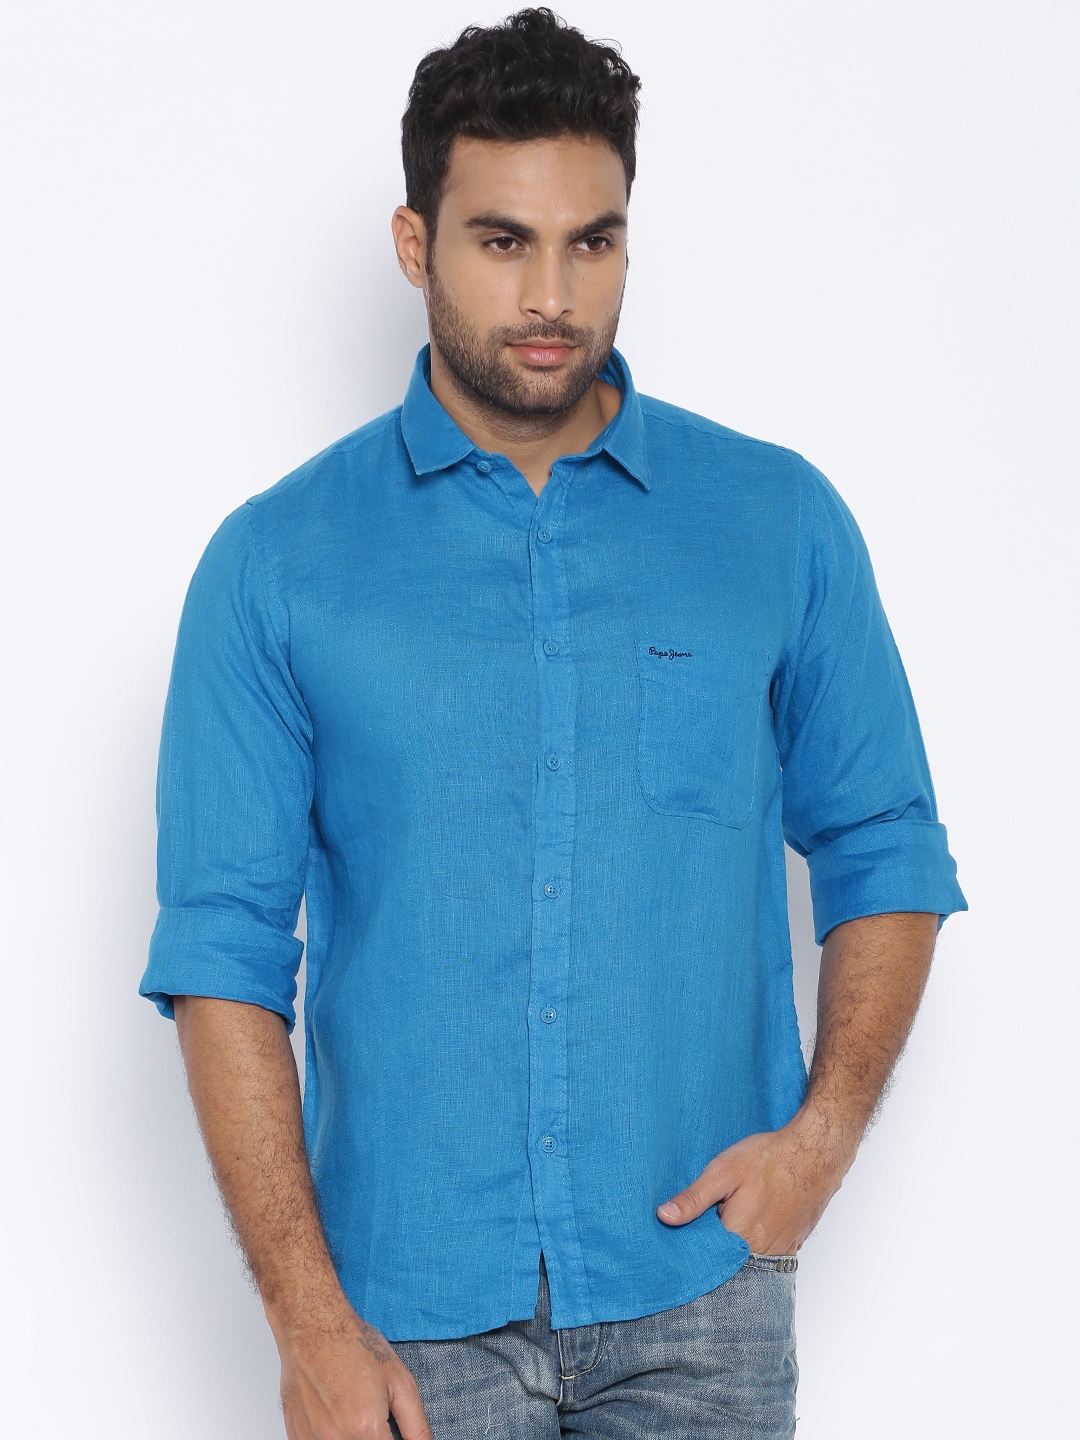 Buy Pepe Jeans Blue Linen Casual Shirt - Shirts for Men 1392713 | Myntra